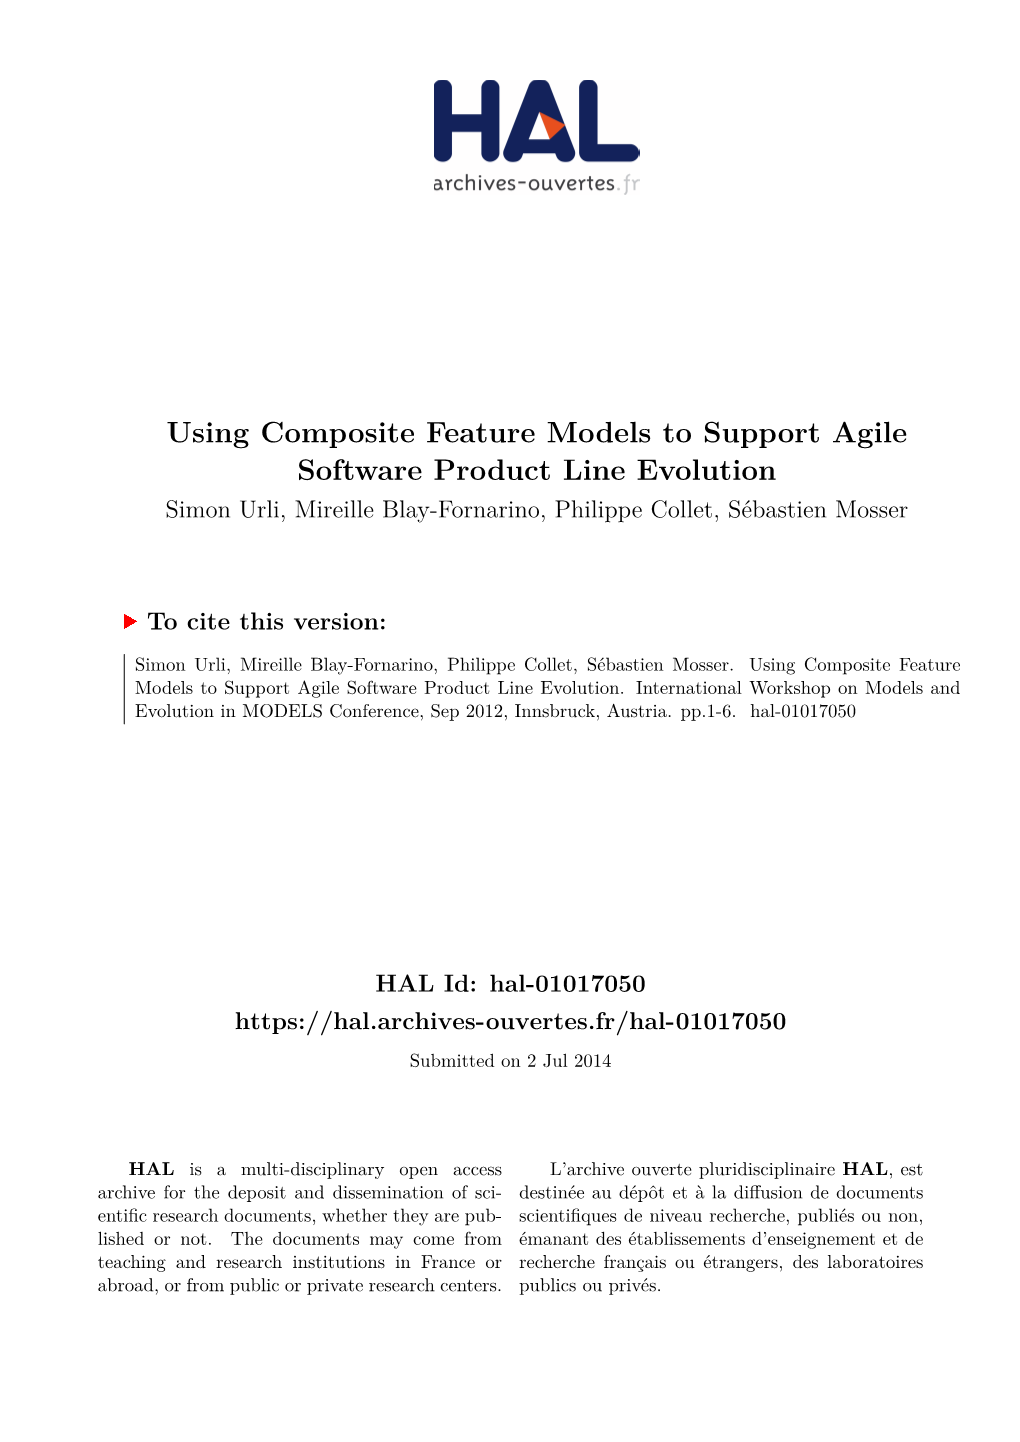 Using Composite Feature Models to Support Agile Software Product Line Evolution Simon Urli, Mireille Blay-Fornarino, Philippe Collet, Sébastien Mosser